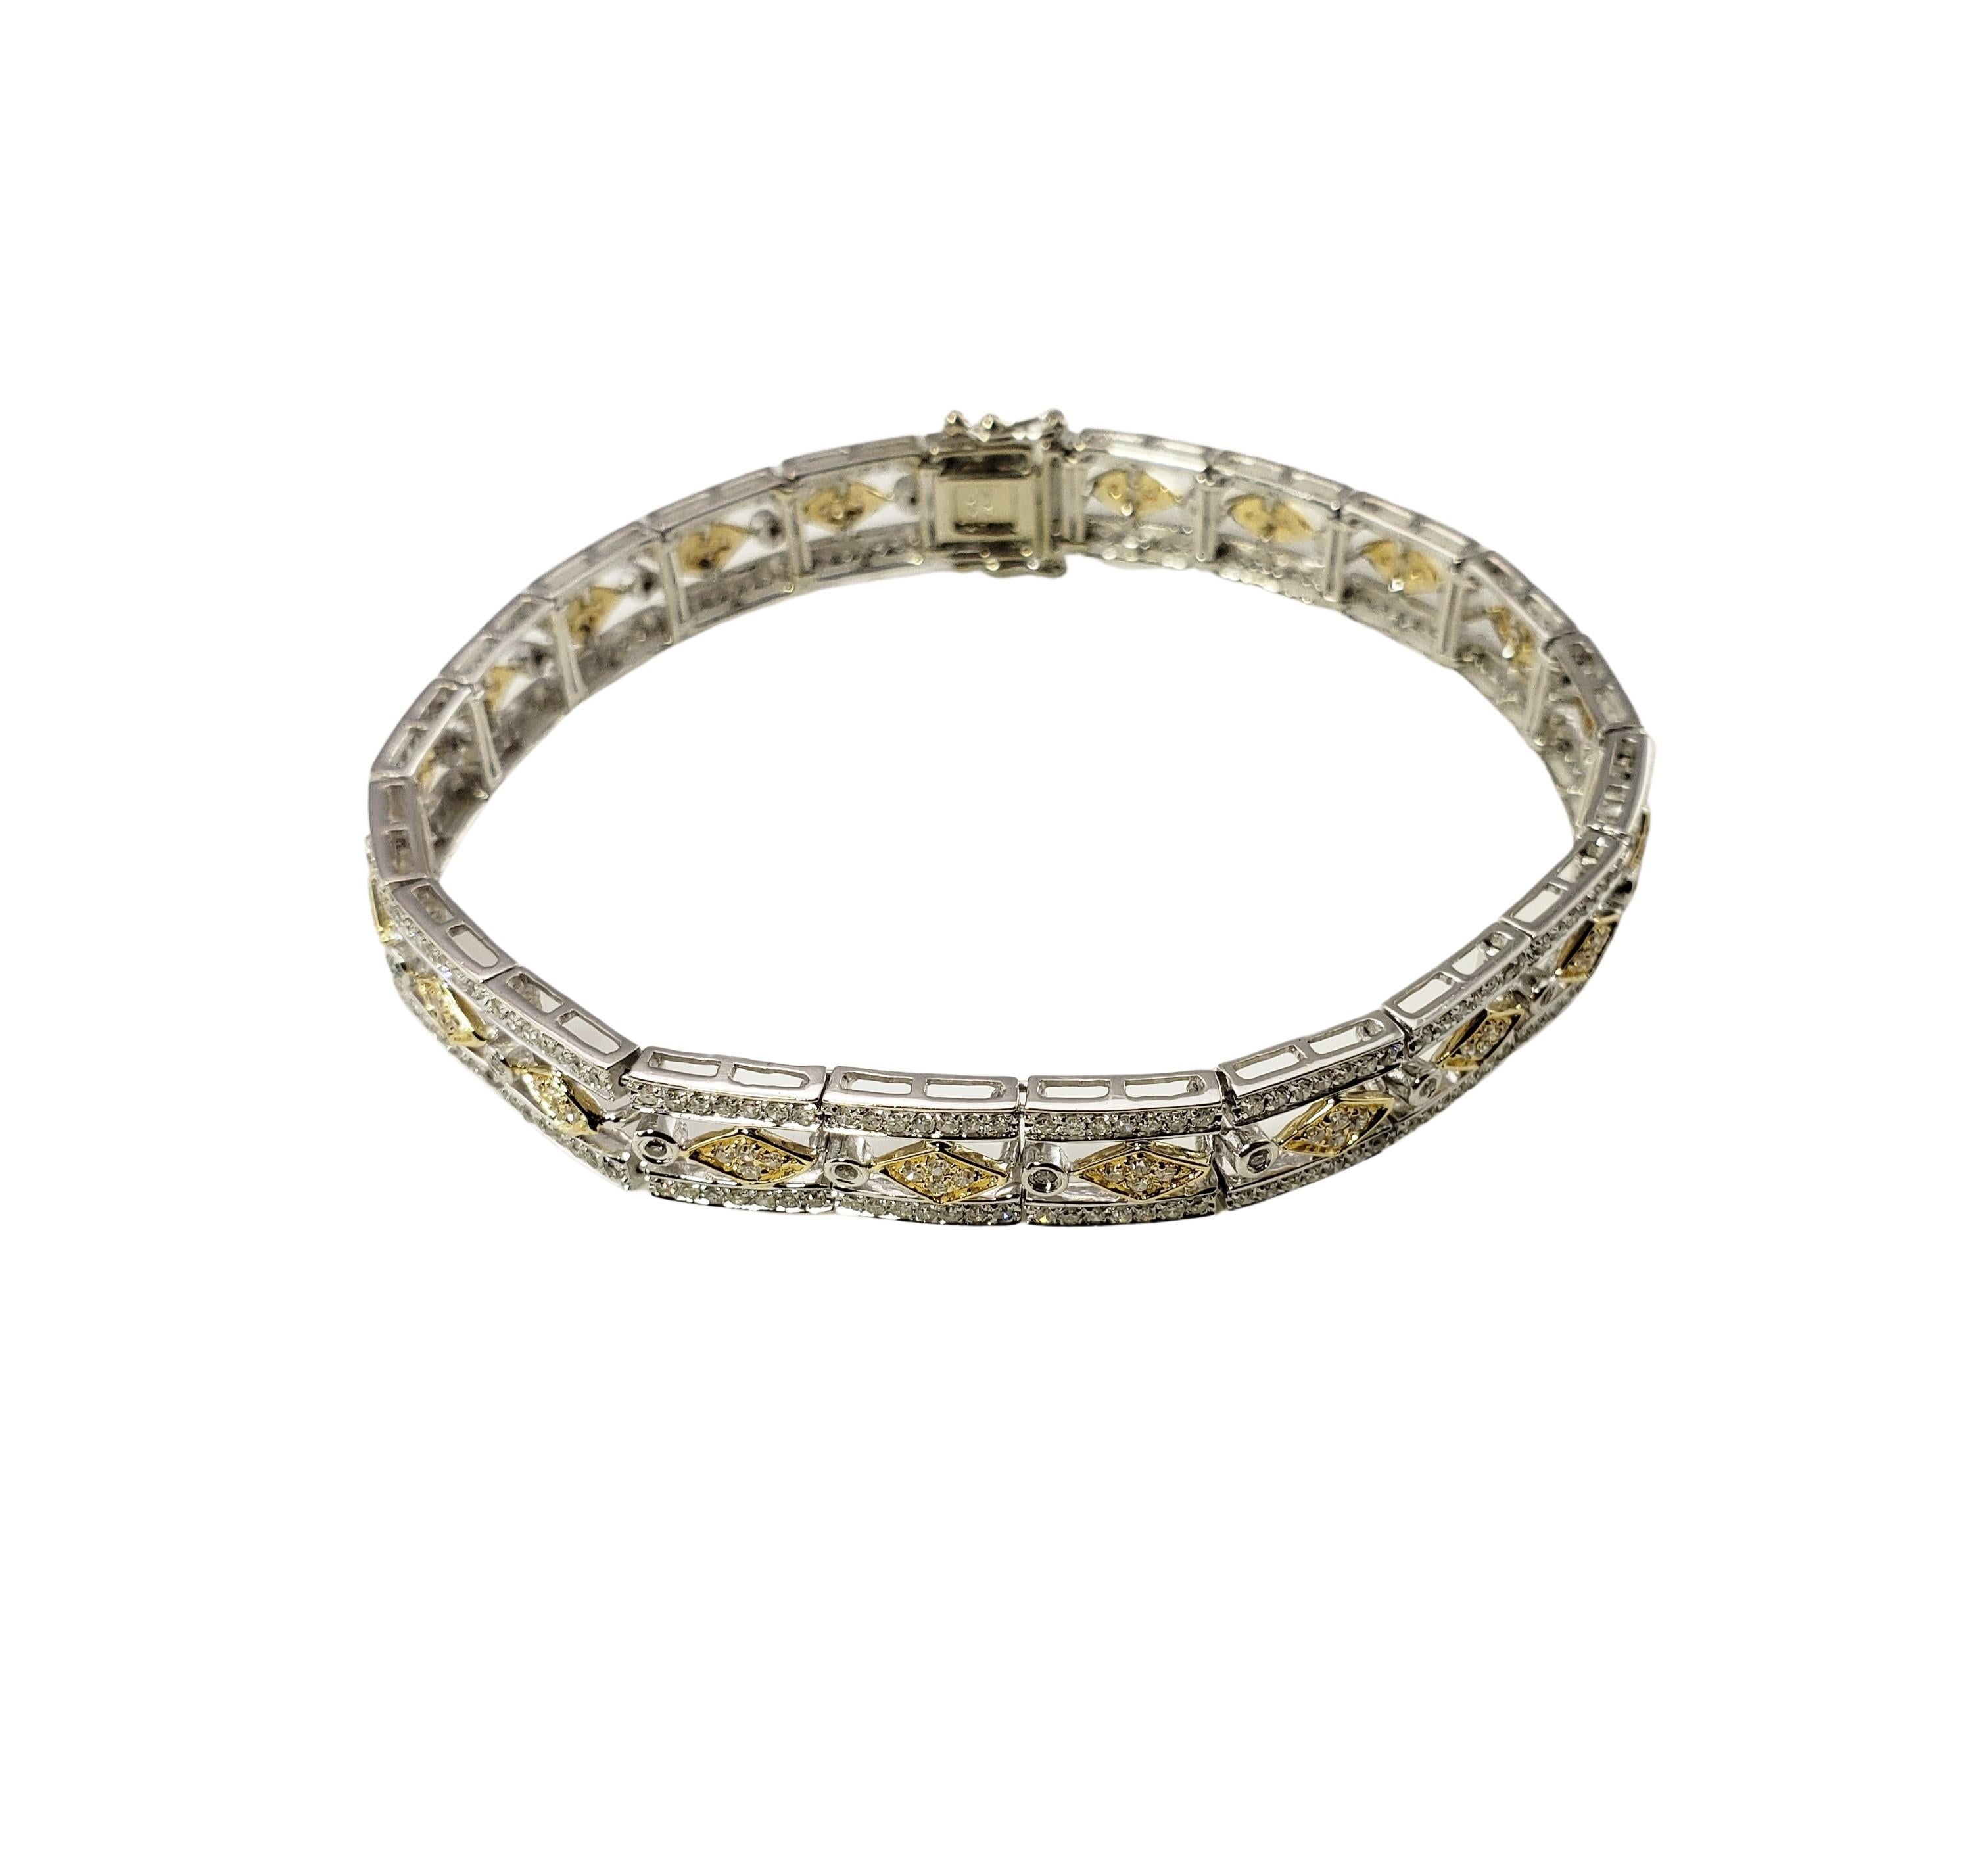 14 Karat White and Yellow Gold Diamond Bracelet-

This sparkling bracelet features 397 round single cut diamonds set in beautifully detailed 14K white and yellow gold.  Width:  8 mm.

Approximate total diamond weight:  2 cts.

Diamond color: